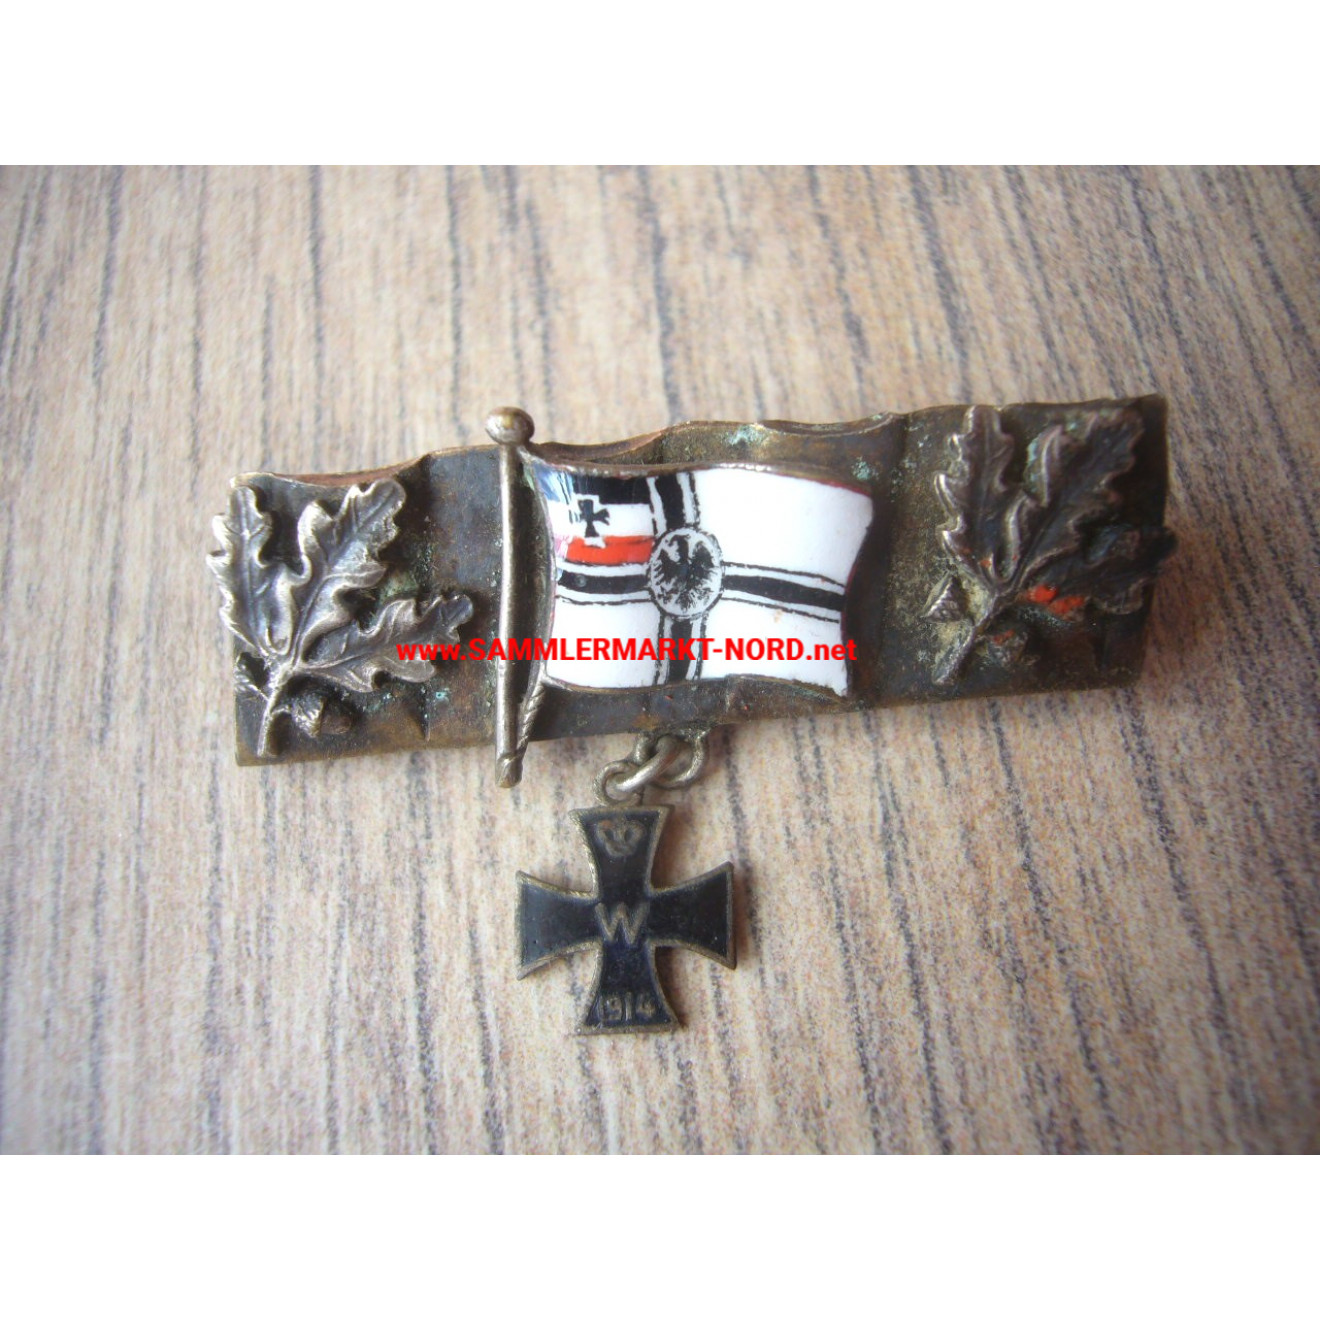 Patriotic Brooch with Imperial War Flag and Iron Cross 1914